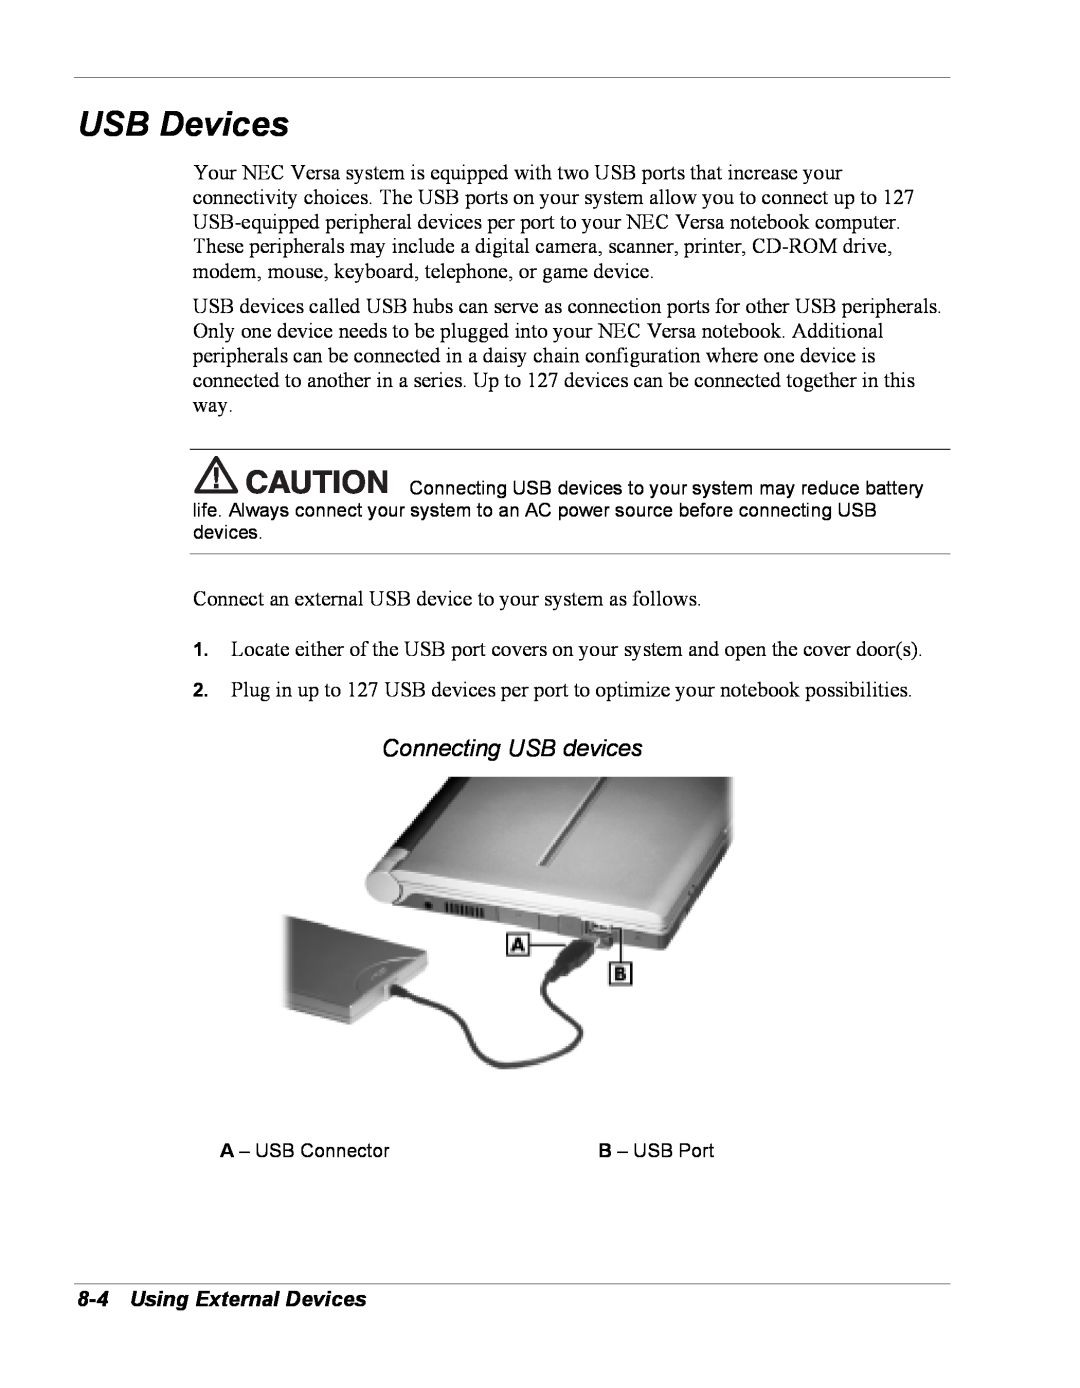 NEC Versa Series manual USB Devices, Connecting USB devices, Using External Devices 